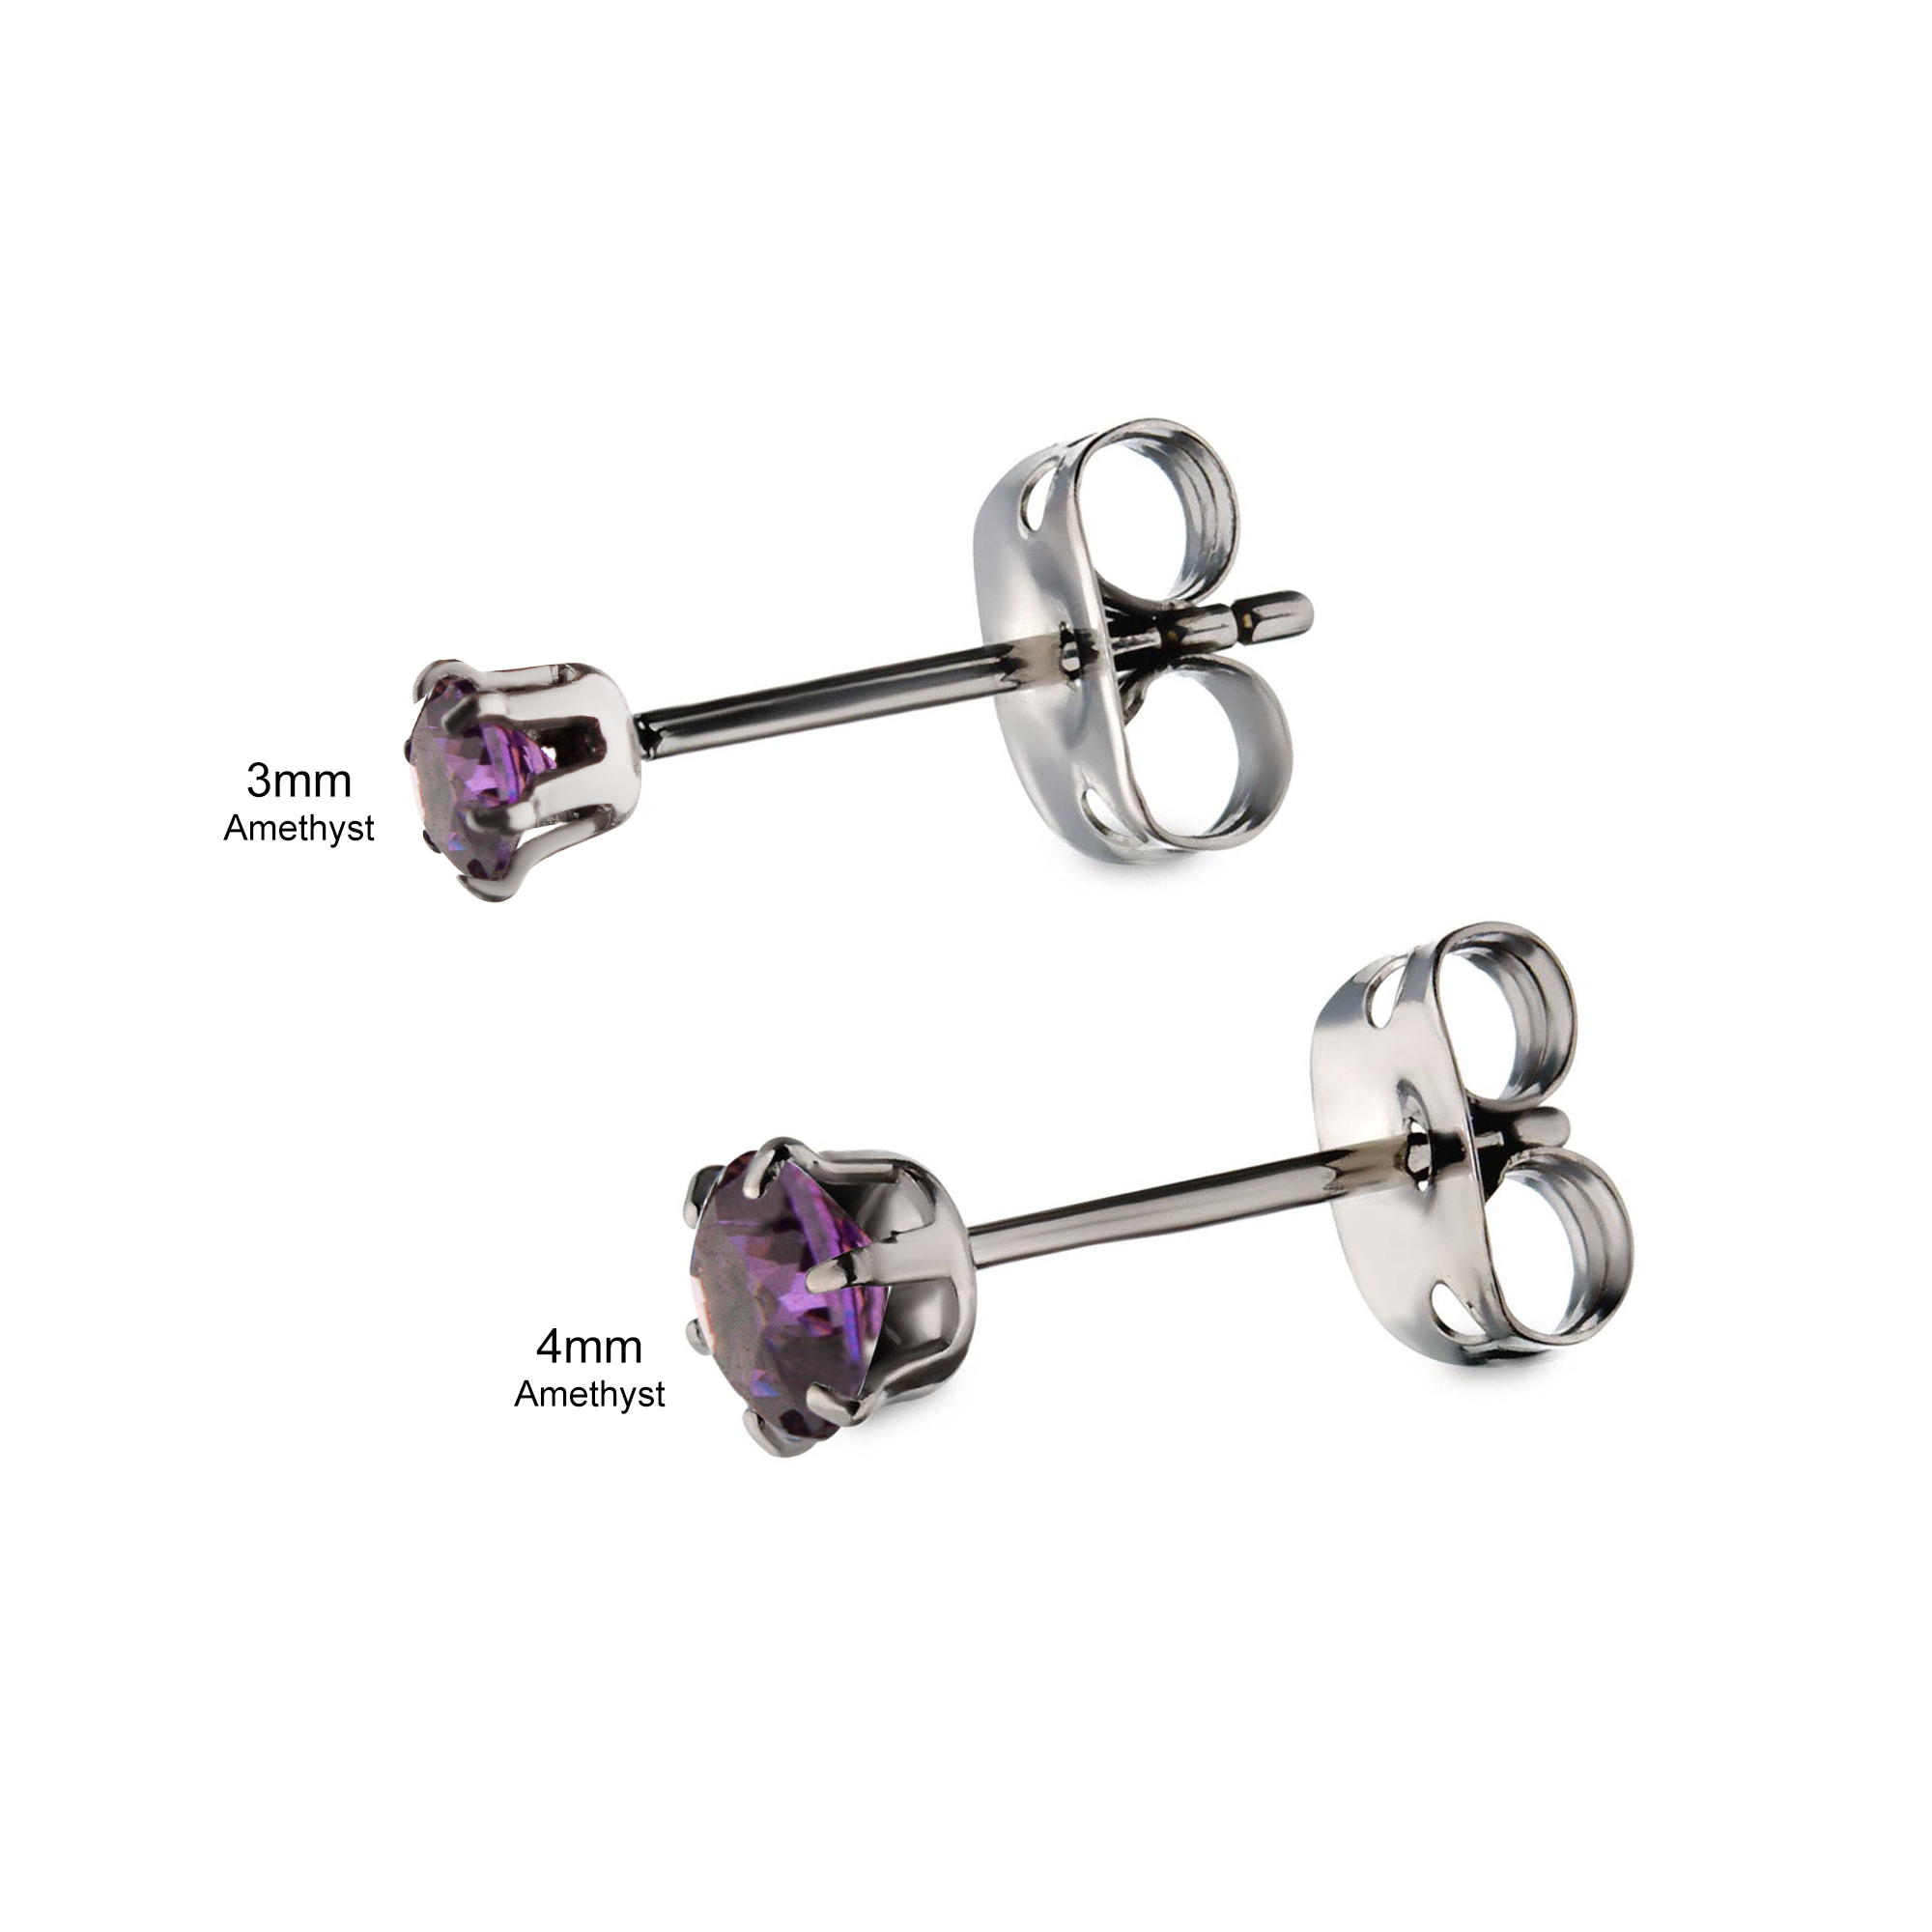 20g Titanium Post and Butterfly Back with Prong Set CZ Stud Earrings Image 5 Lewis Jewelers, Inc. Ansonia, CT